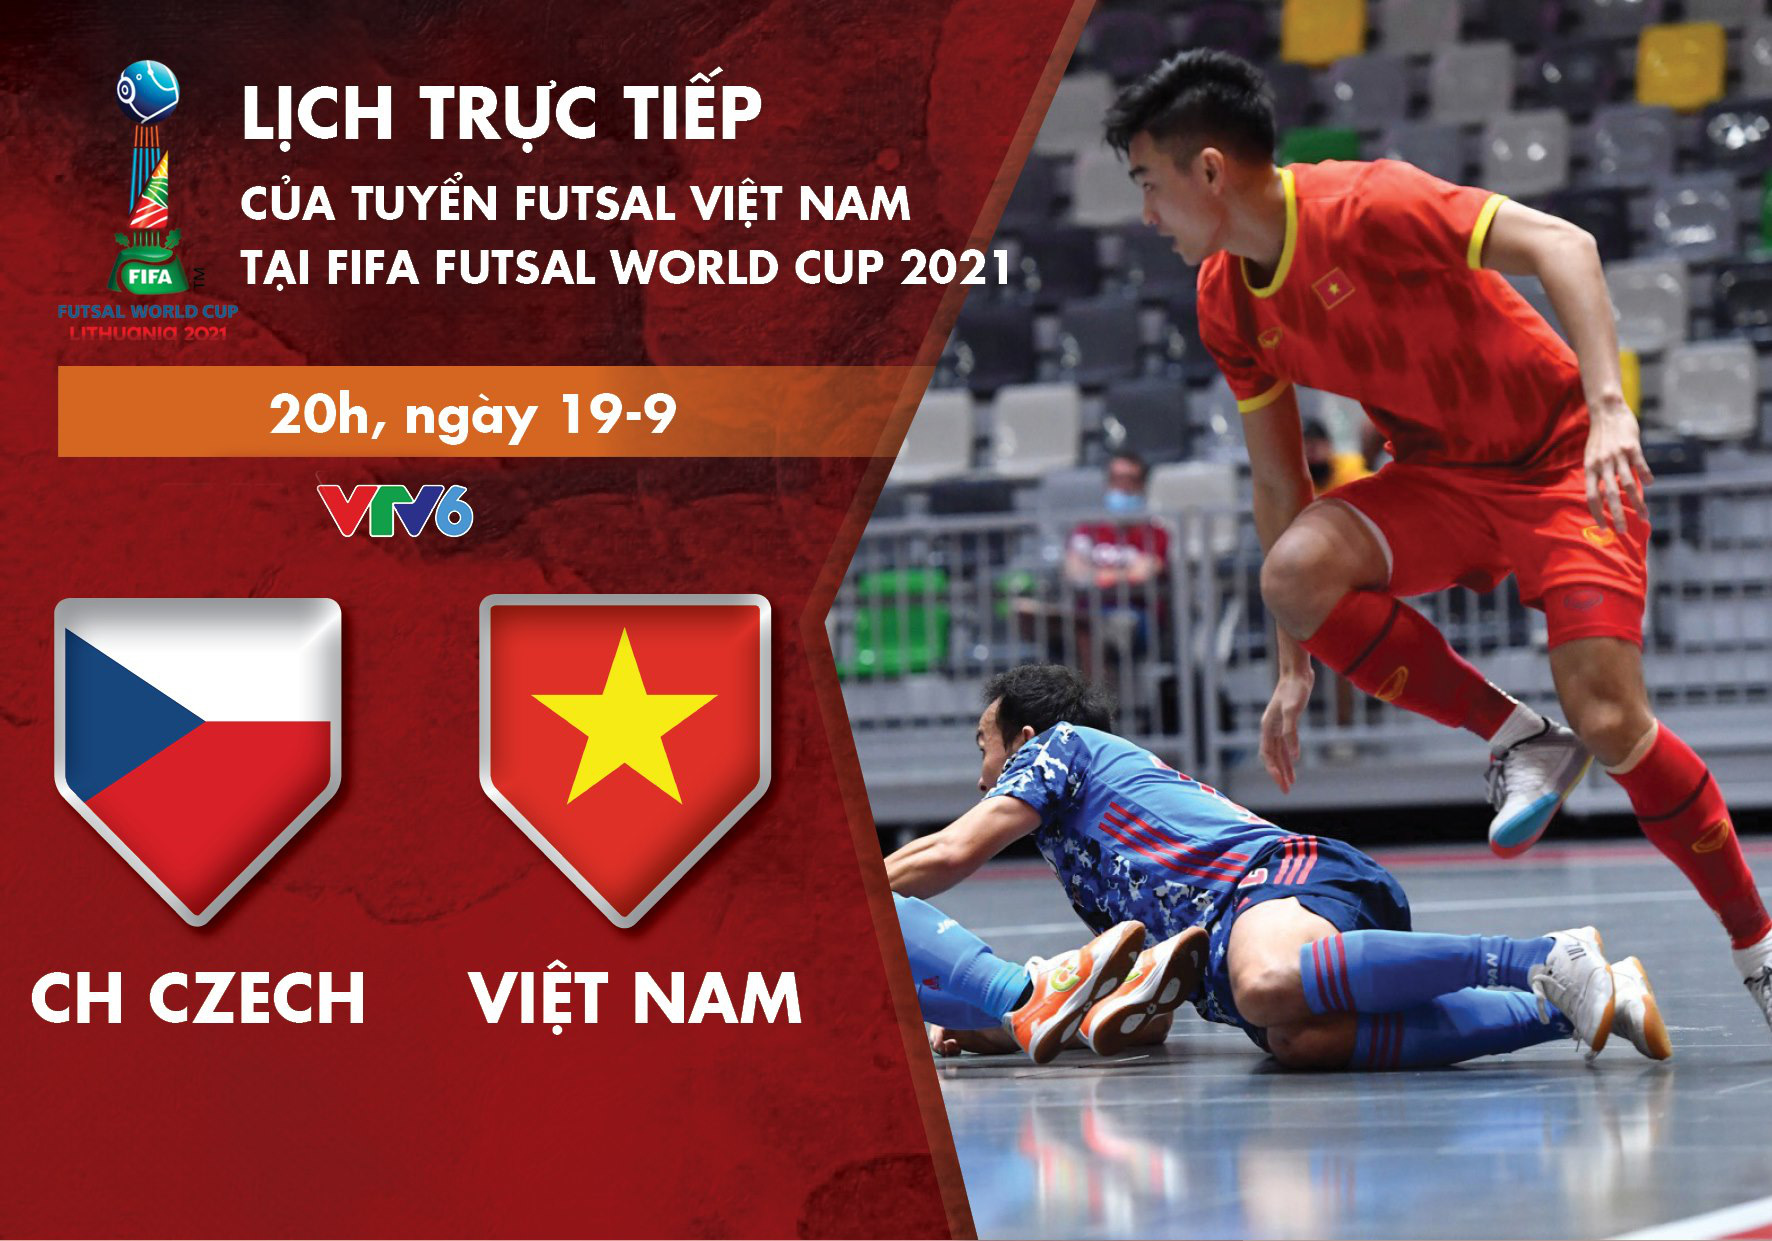 Vietnam to face Czech Republic in last group-stage game at FIFA Futsal World Cup